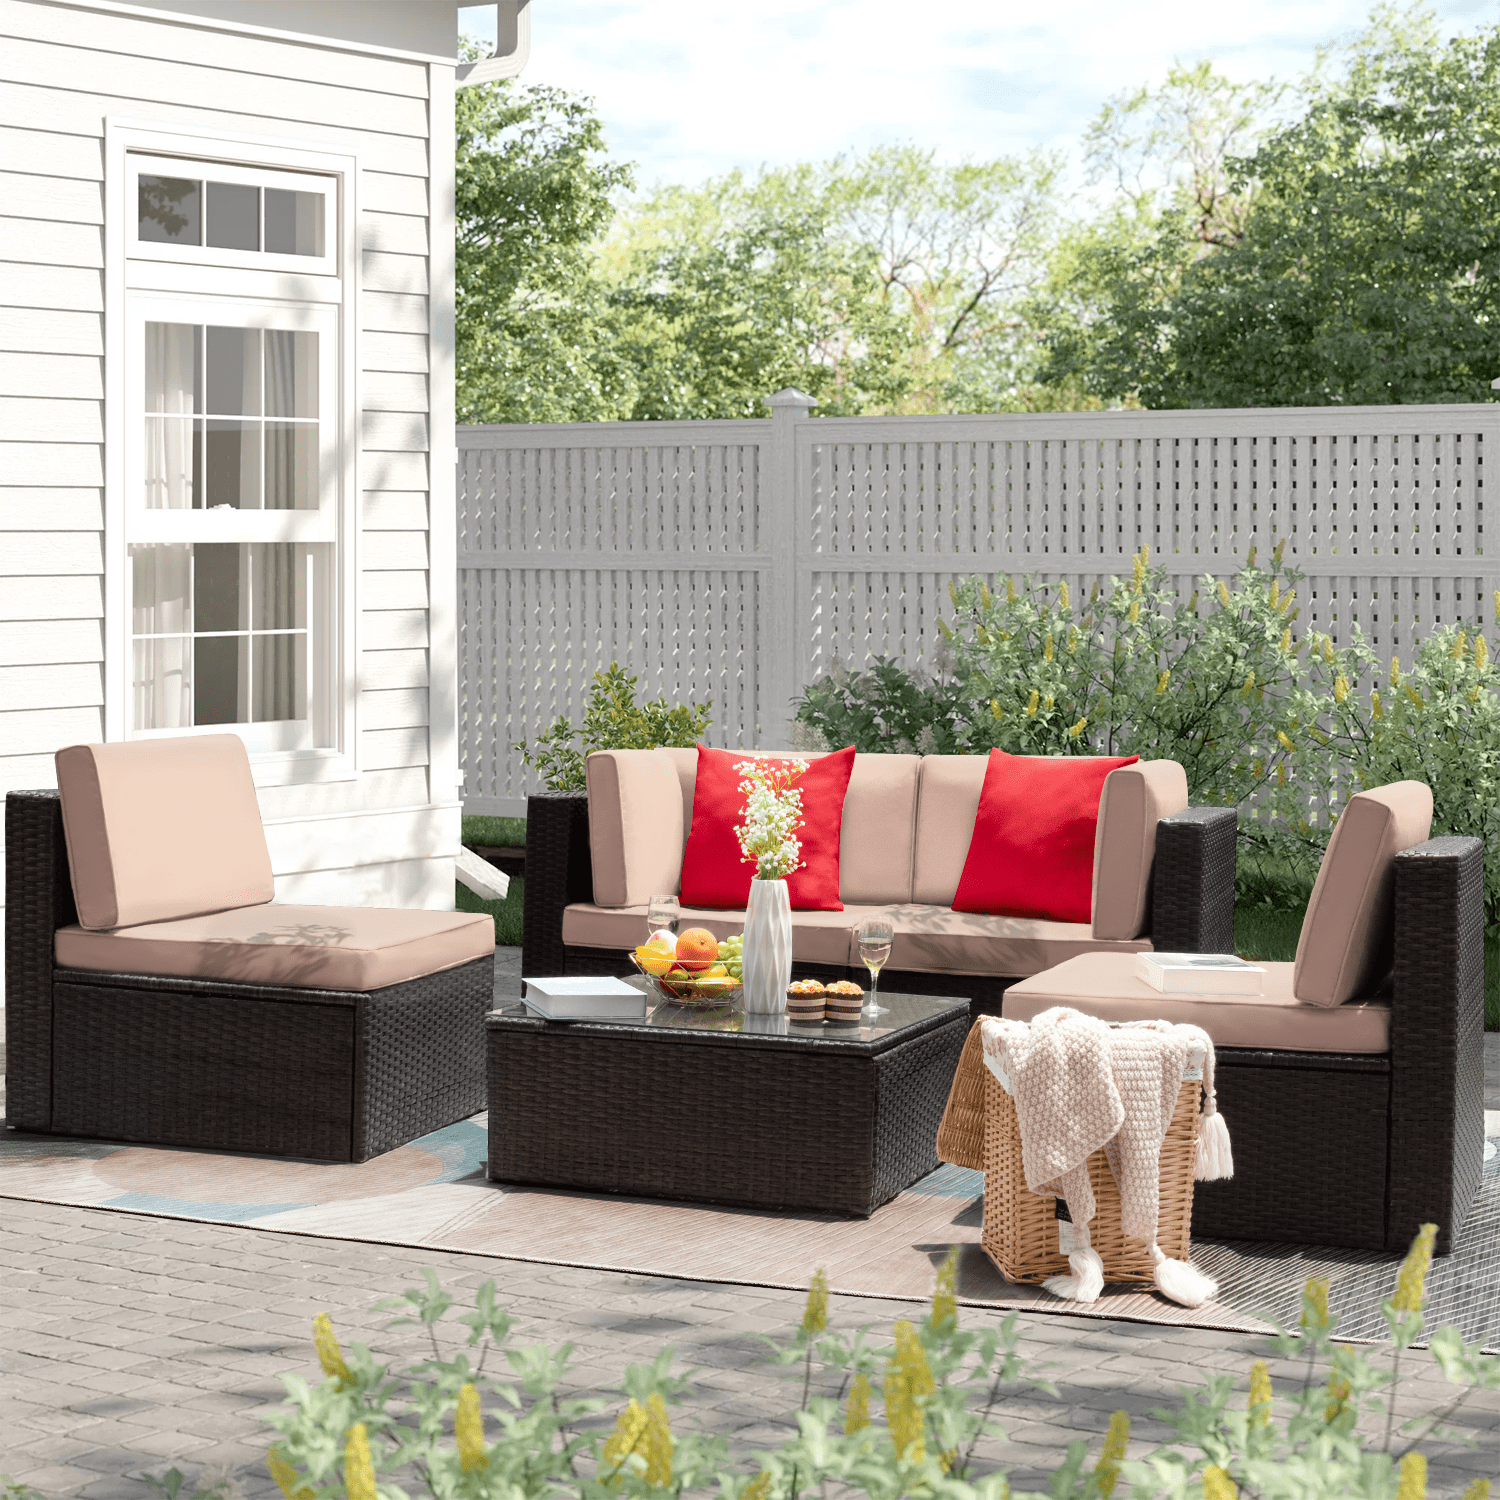 Walsunny 3 Piece Patio Furniture Set 2 Cushioned Chairs & End Table Chill Time Modern Outdoor Furniture Backyard Garden Lawn Chat Set Outdoor Wicker Rattan Conversation Set